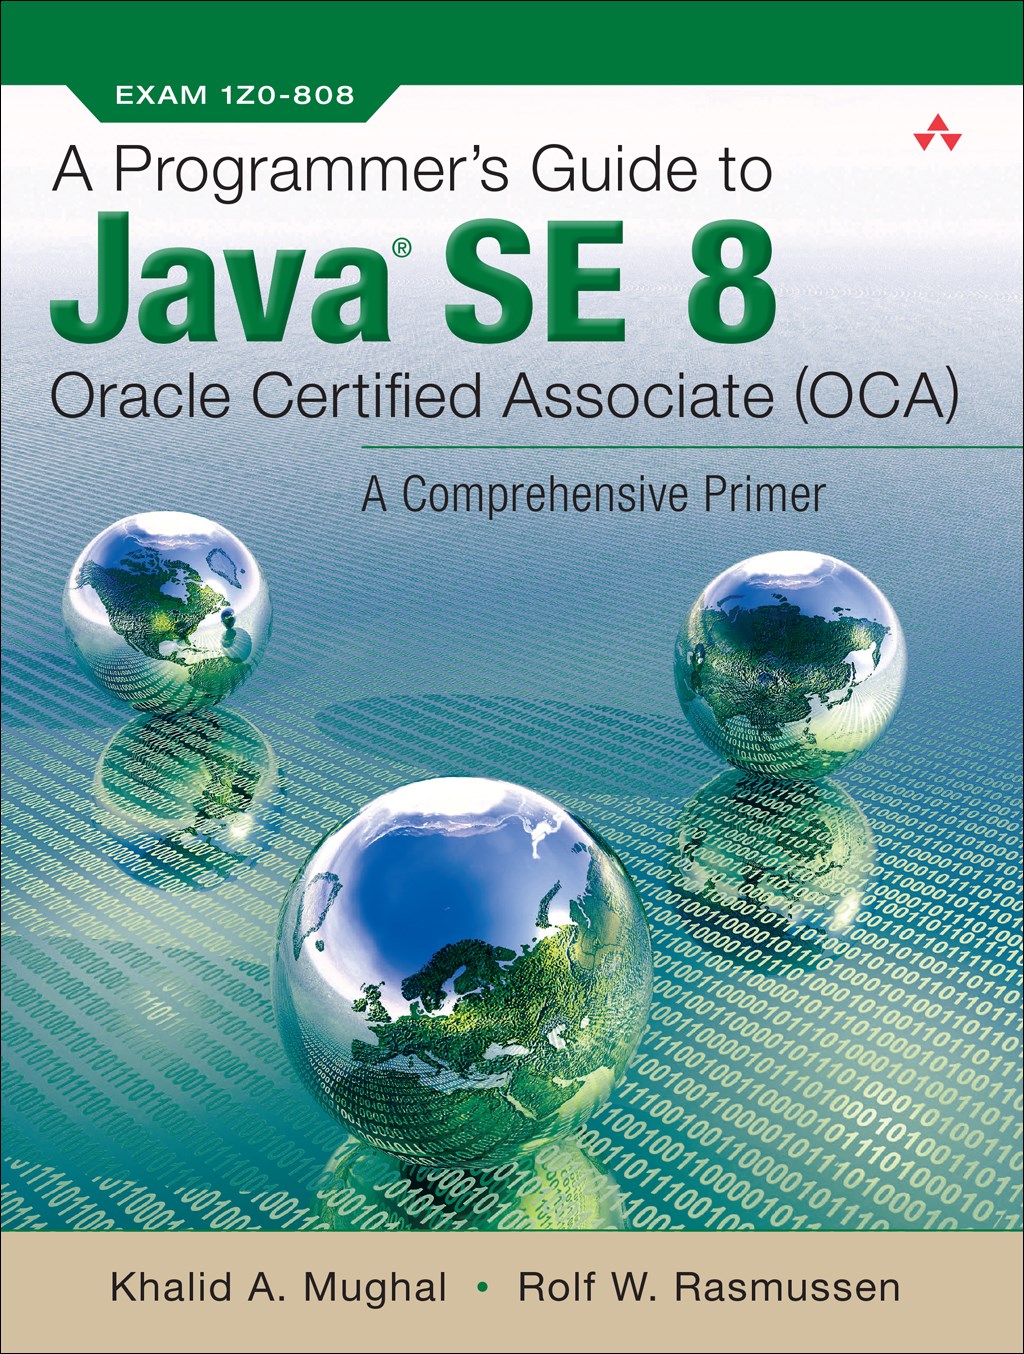 Programmer's Guide to Java SE 8 Oracle Certified Associate (OCA), A